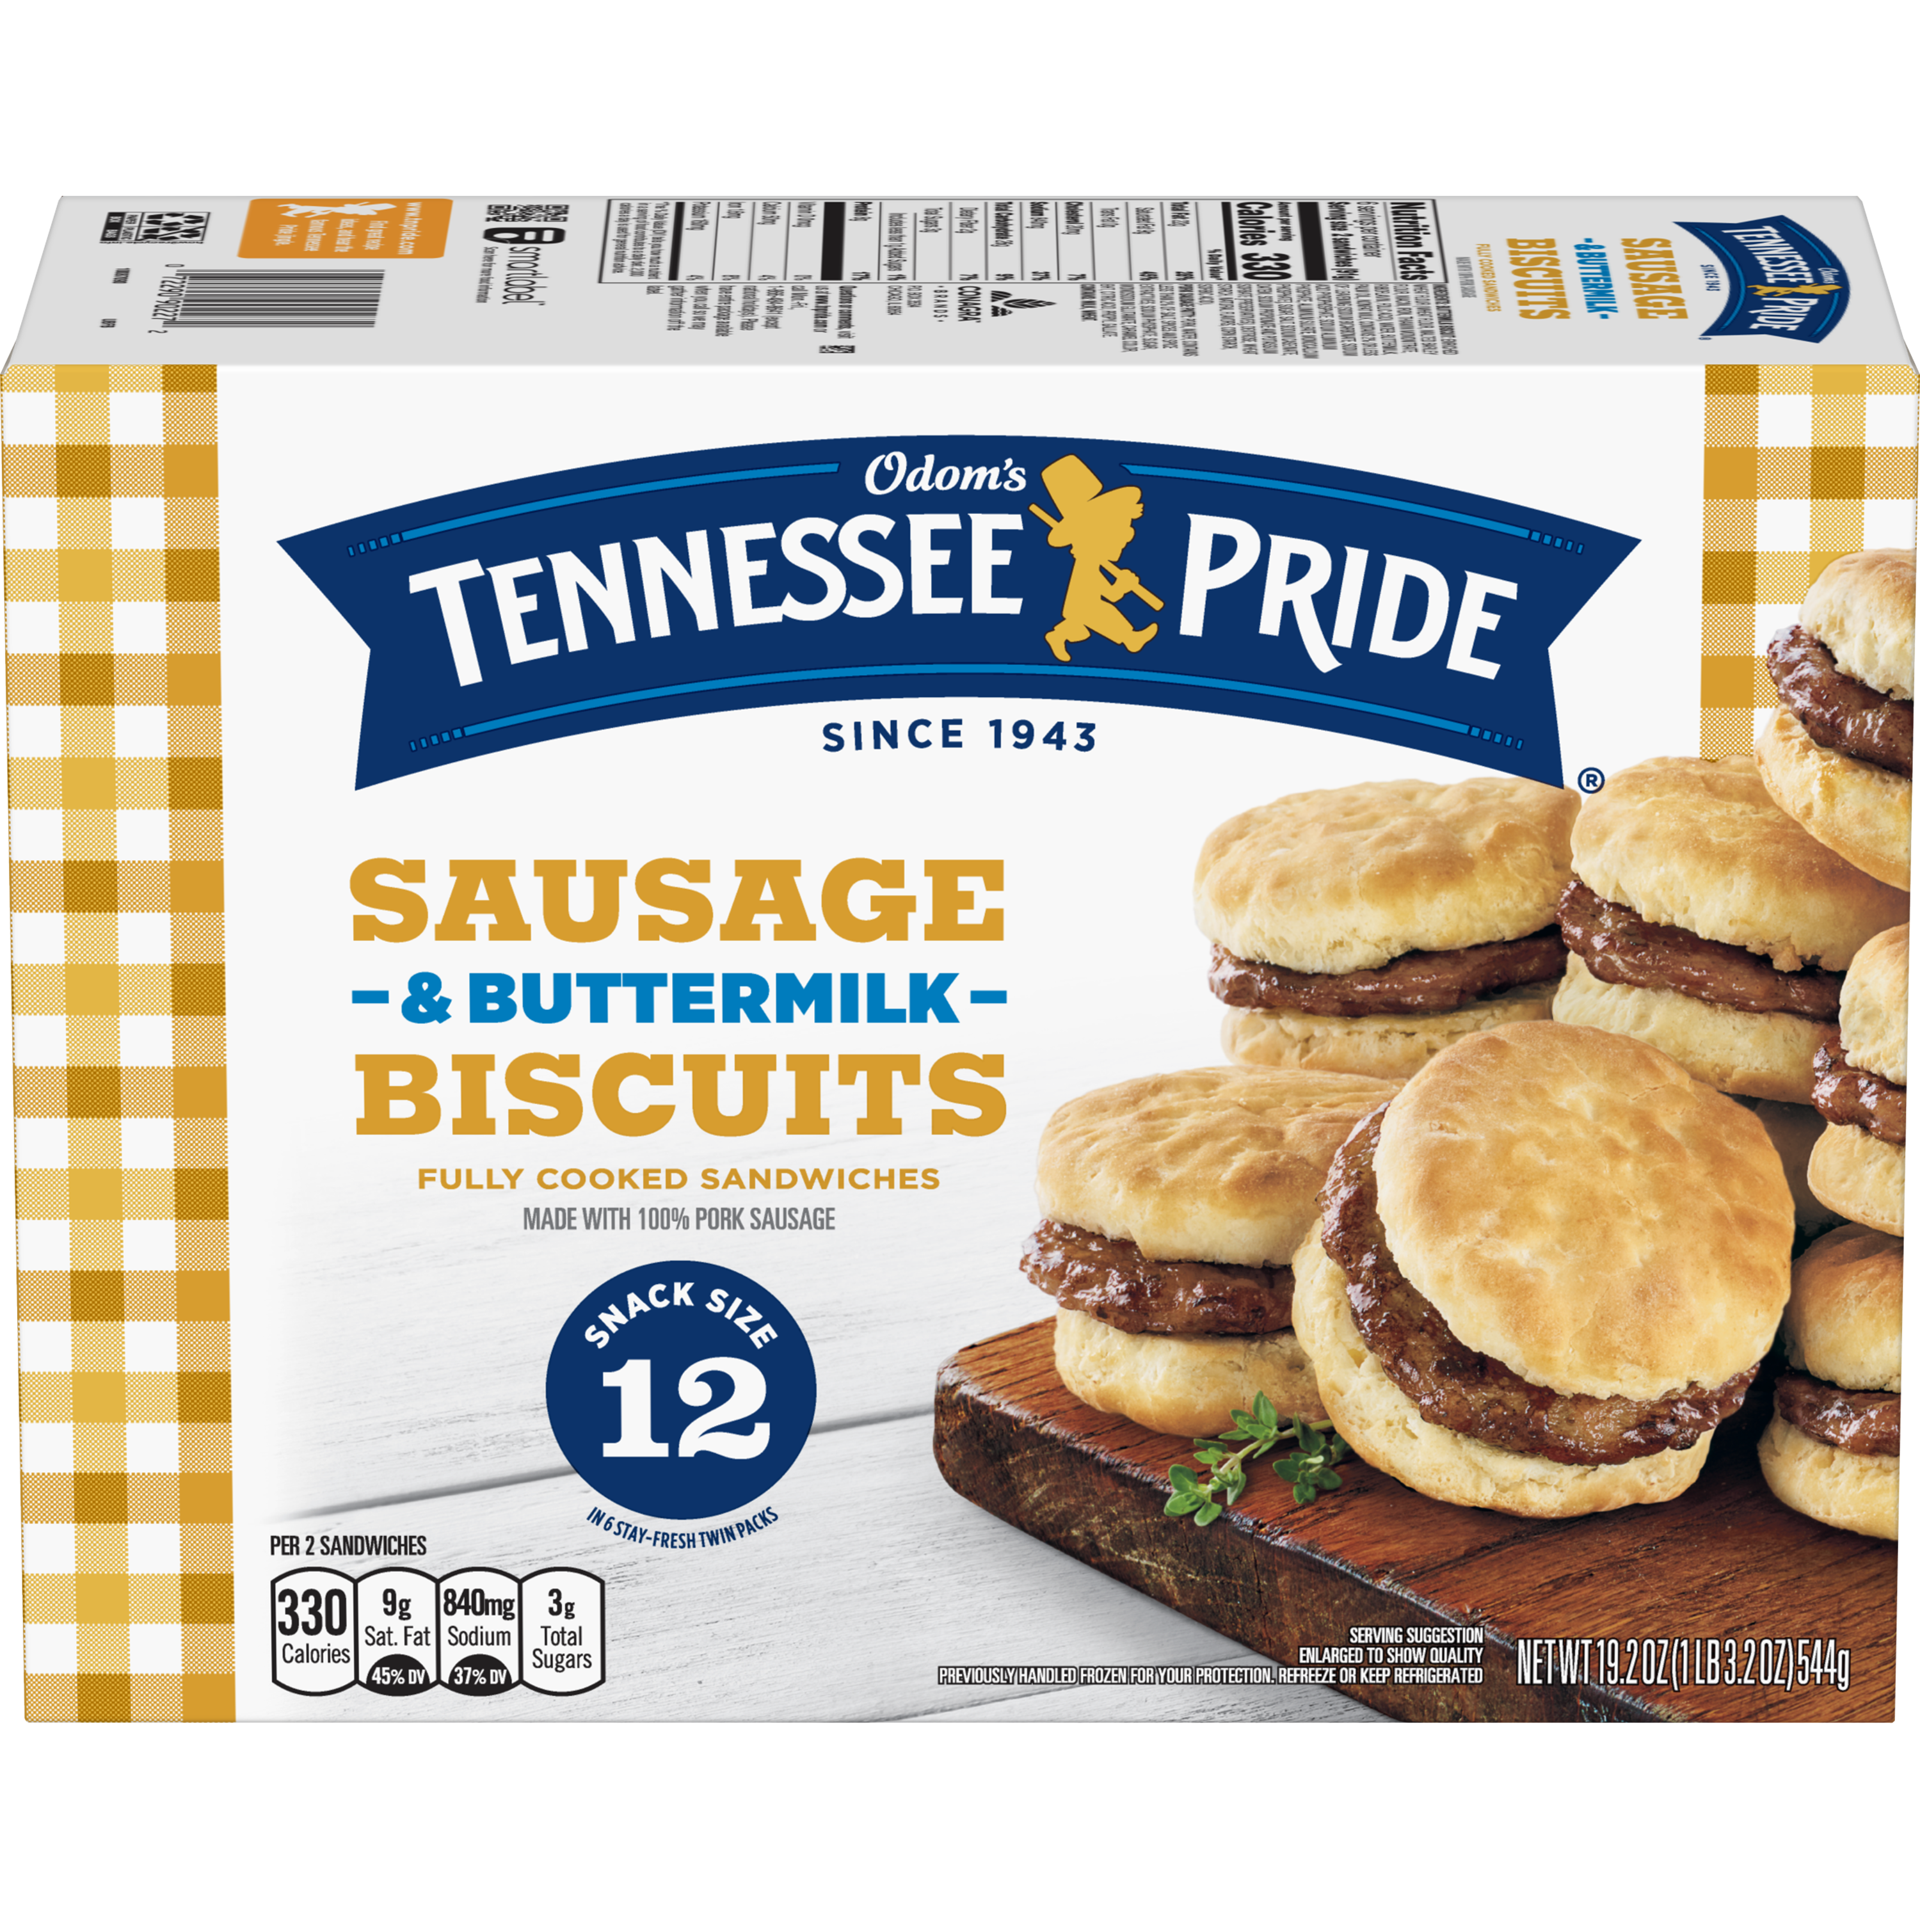 slide 5 of 7, Odom's Tennessee Pride Sausage & Buttermilk Biscuits, Snack Size Frozen Breakfast Sandwiches, 12 Count, 12 ct